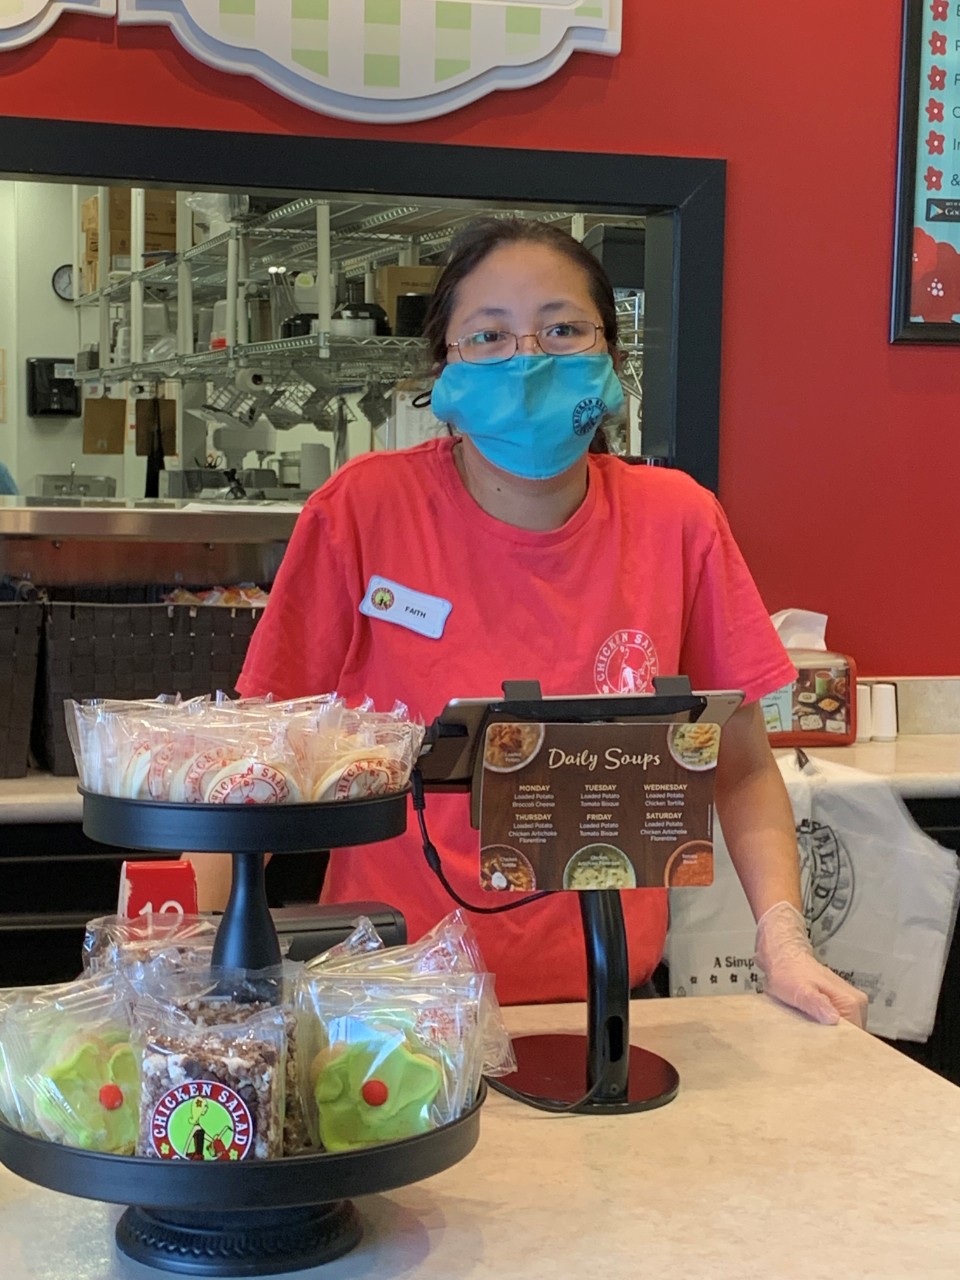 Union student Faith wearing a bright pink shirt and standing behind the front counter at the restaurant where she works, in front of the cash register. She’s wearing a mask and a name tag.